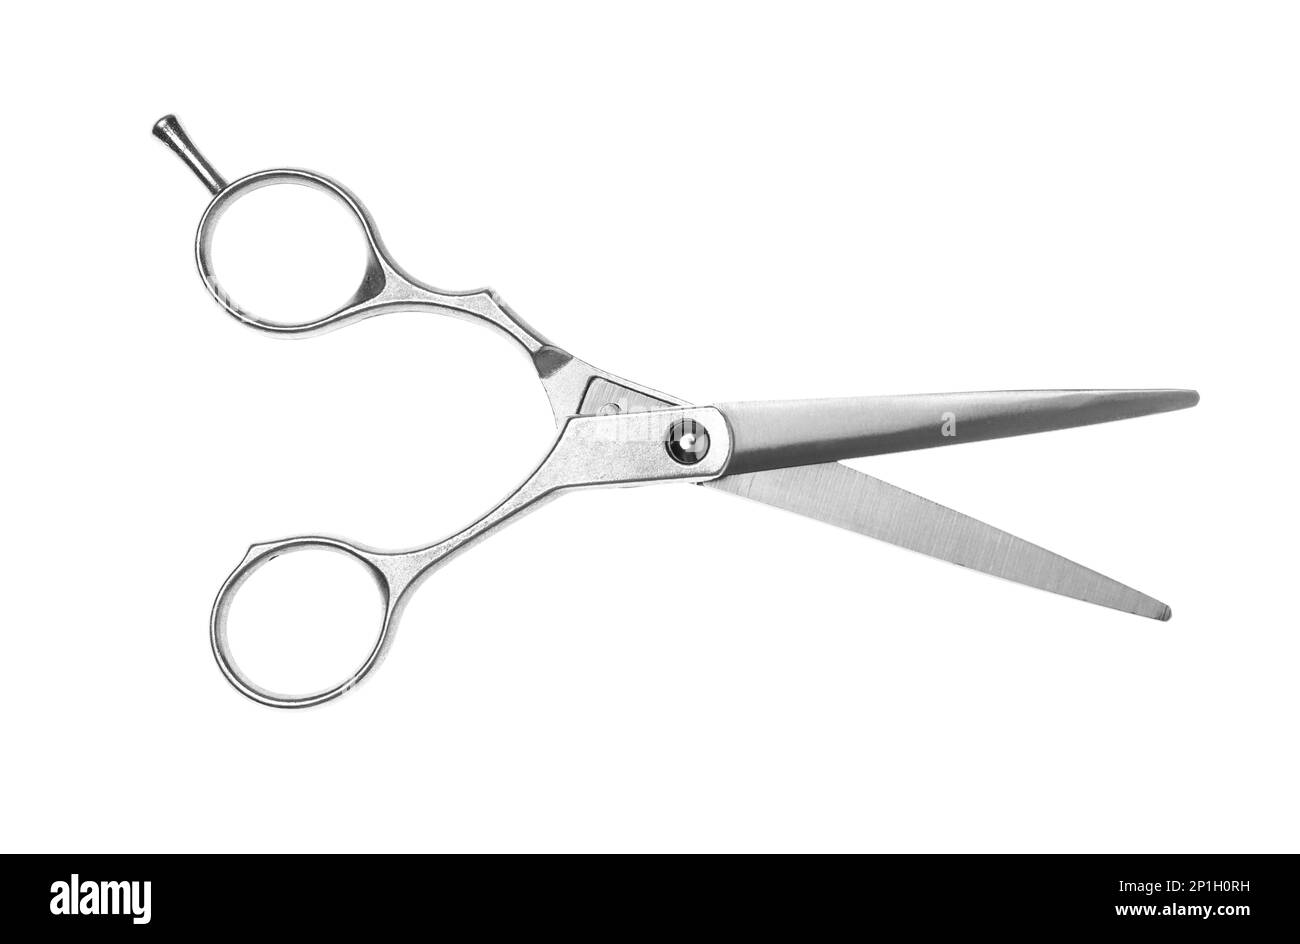 Different types of professional hairdresser scissors. Word HAIRSTYLE on  white background Stock Photo by ©belchonock 126689672